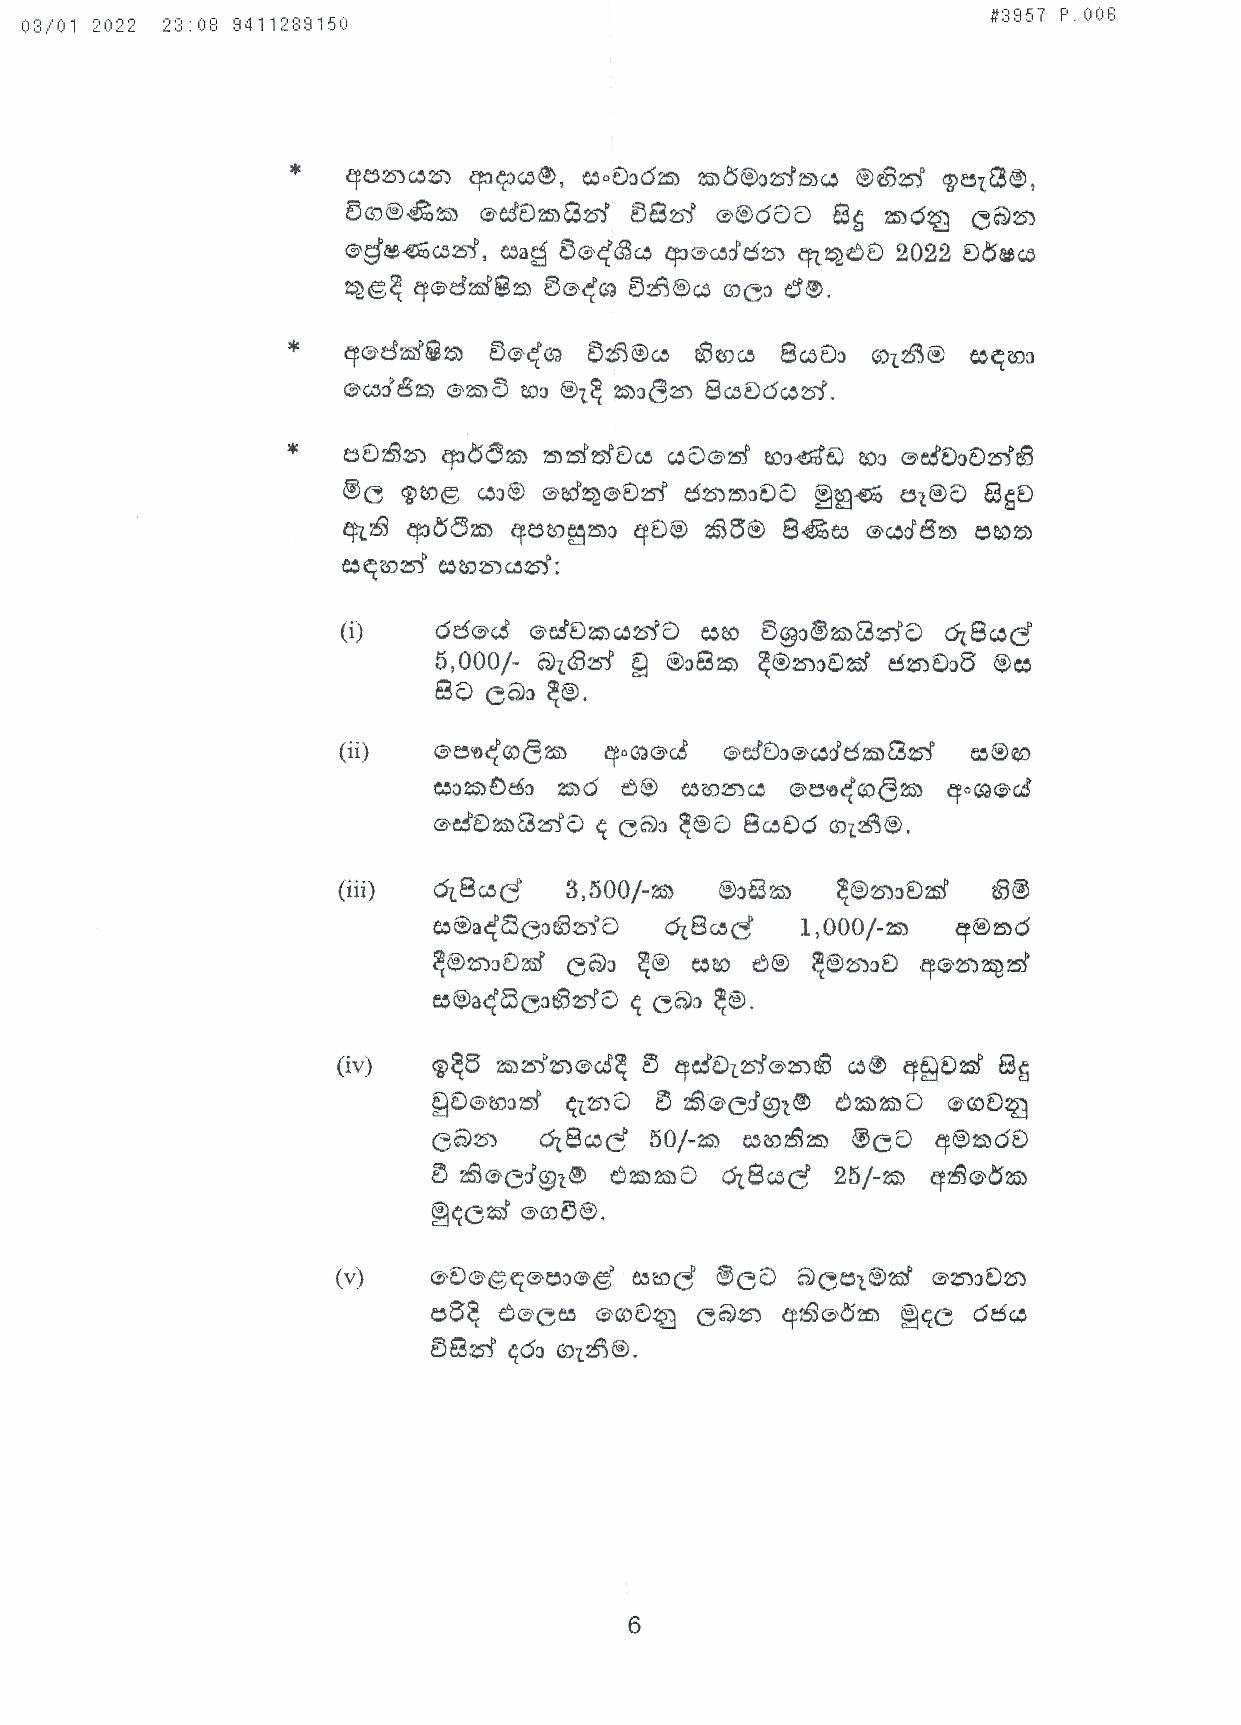 Cabinet Decision on 03.01.2022 page 006